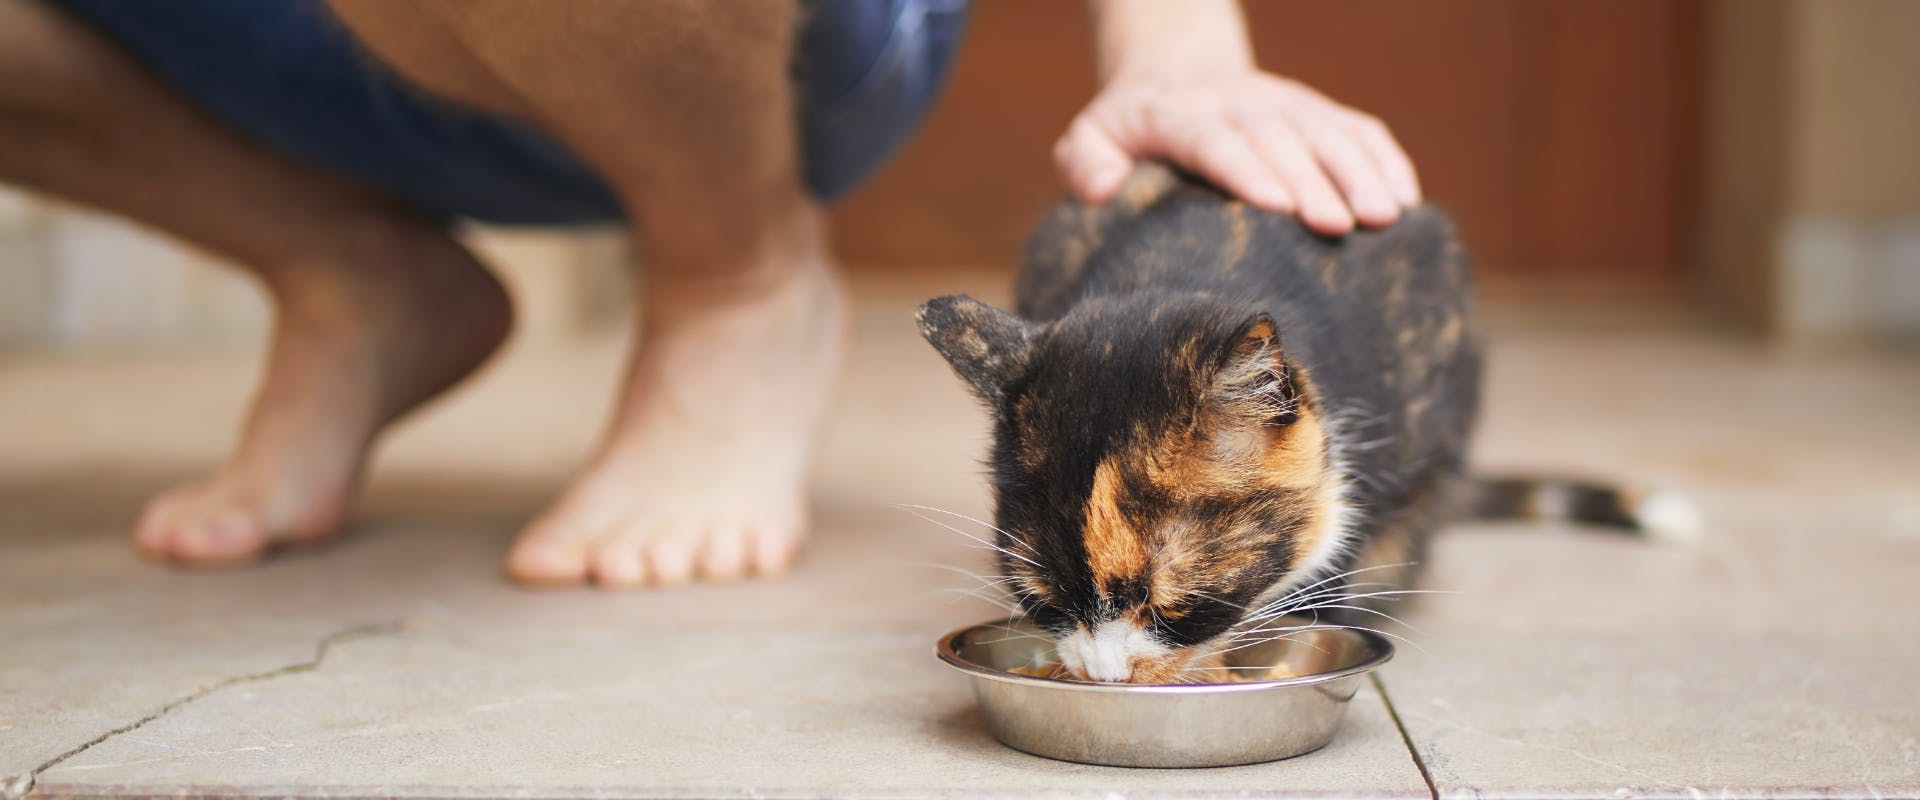 A cat being fed.